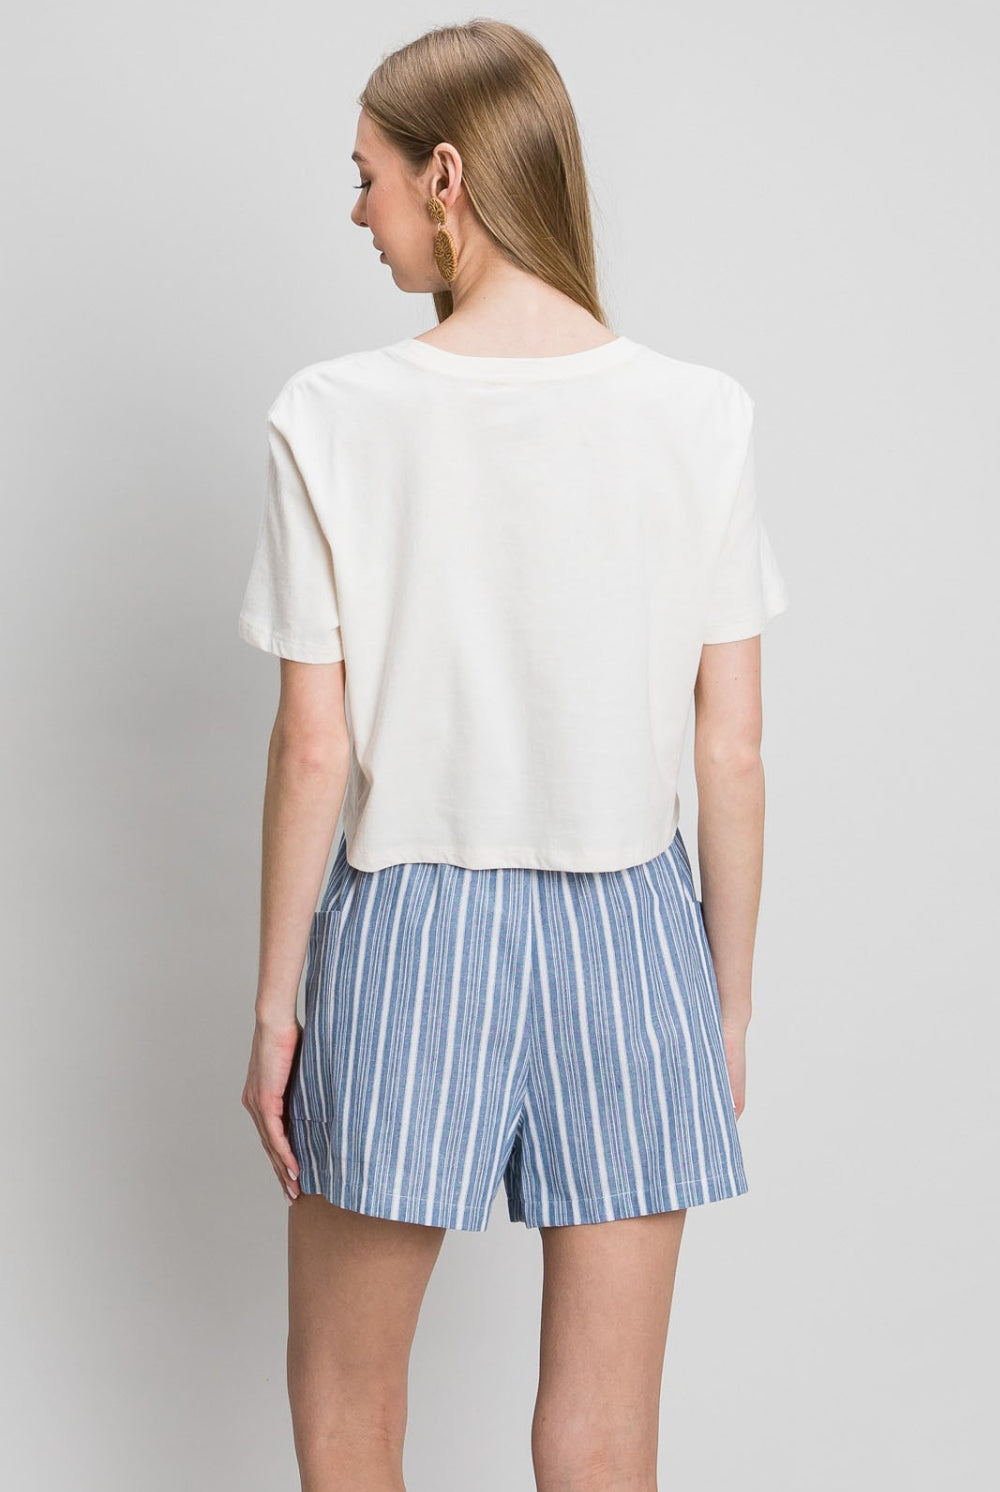 Woman wearing blue and white striped cotton shorts with a tie waist, paired with a white graphic t-shirt and gold hoop earrings.